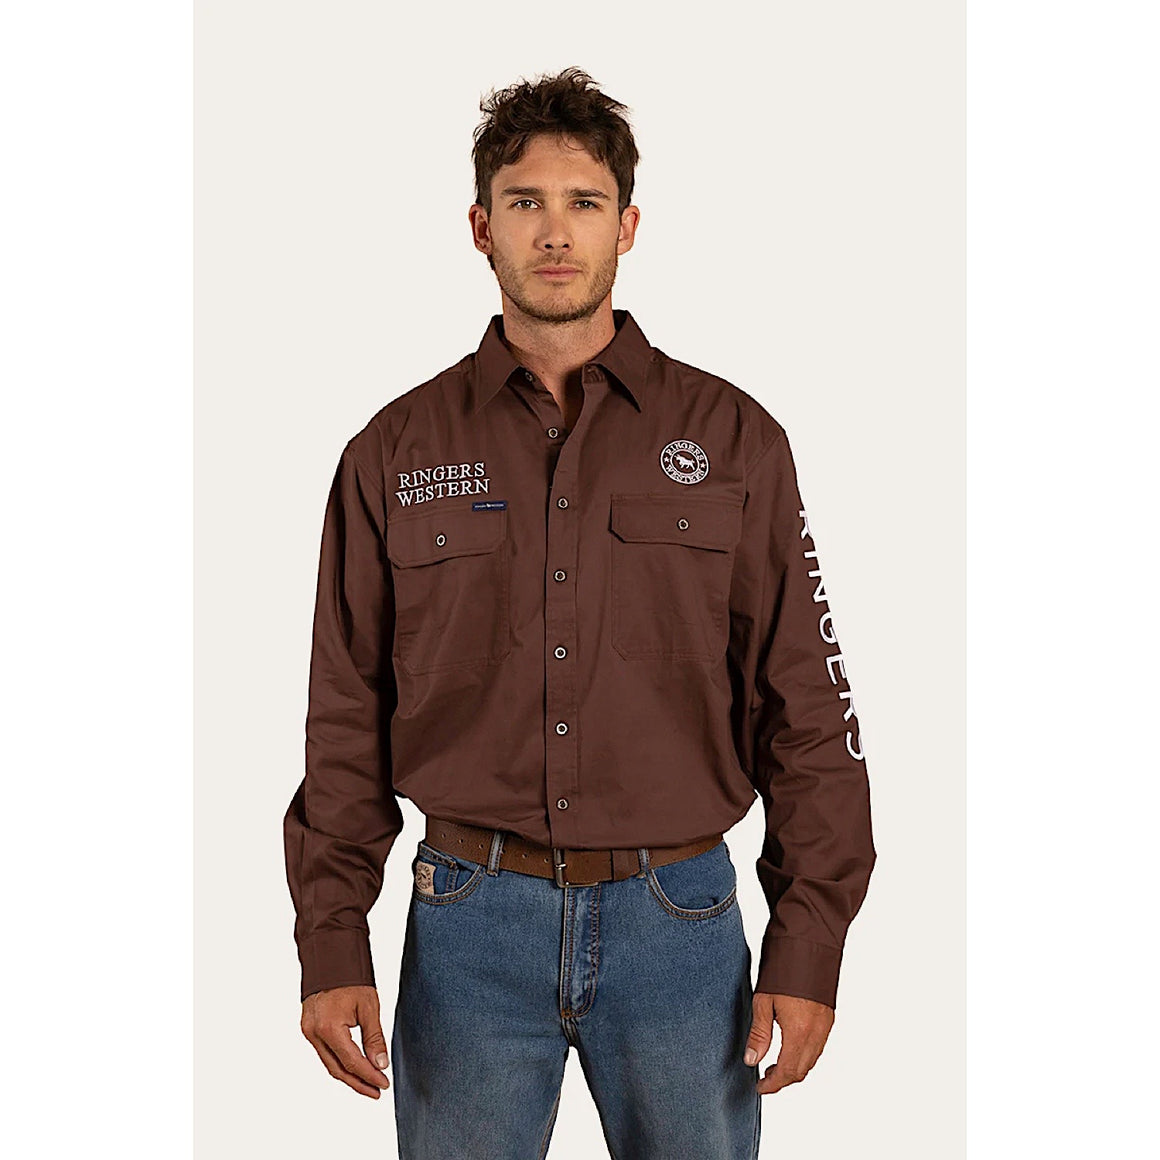 Ringers Western Hawkeye Men's Full Button Work Shirt - Chocolate with White Embroidery